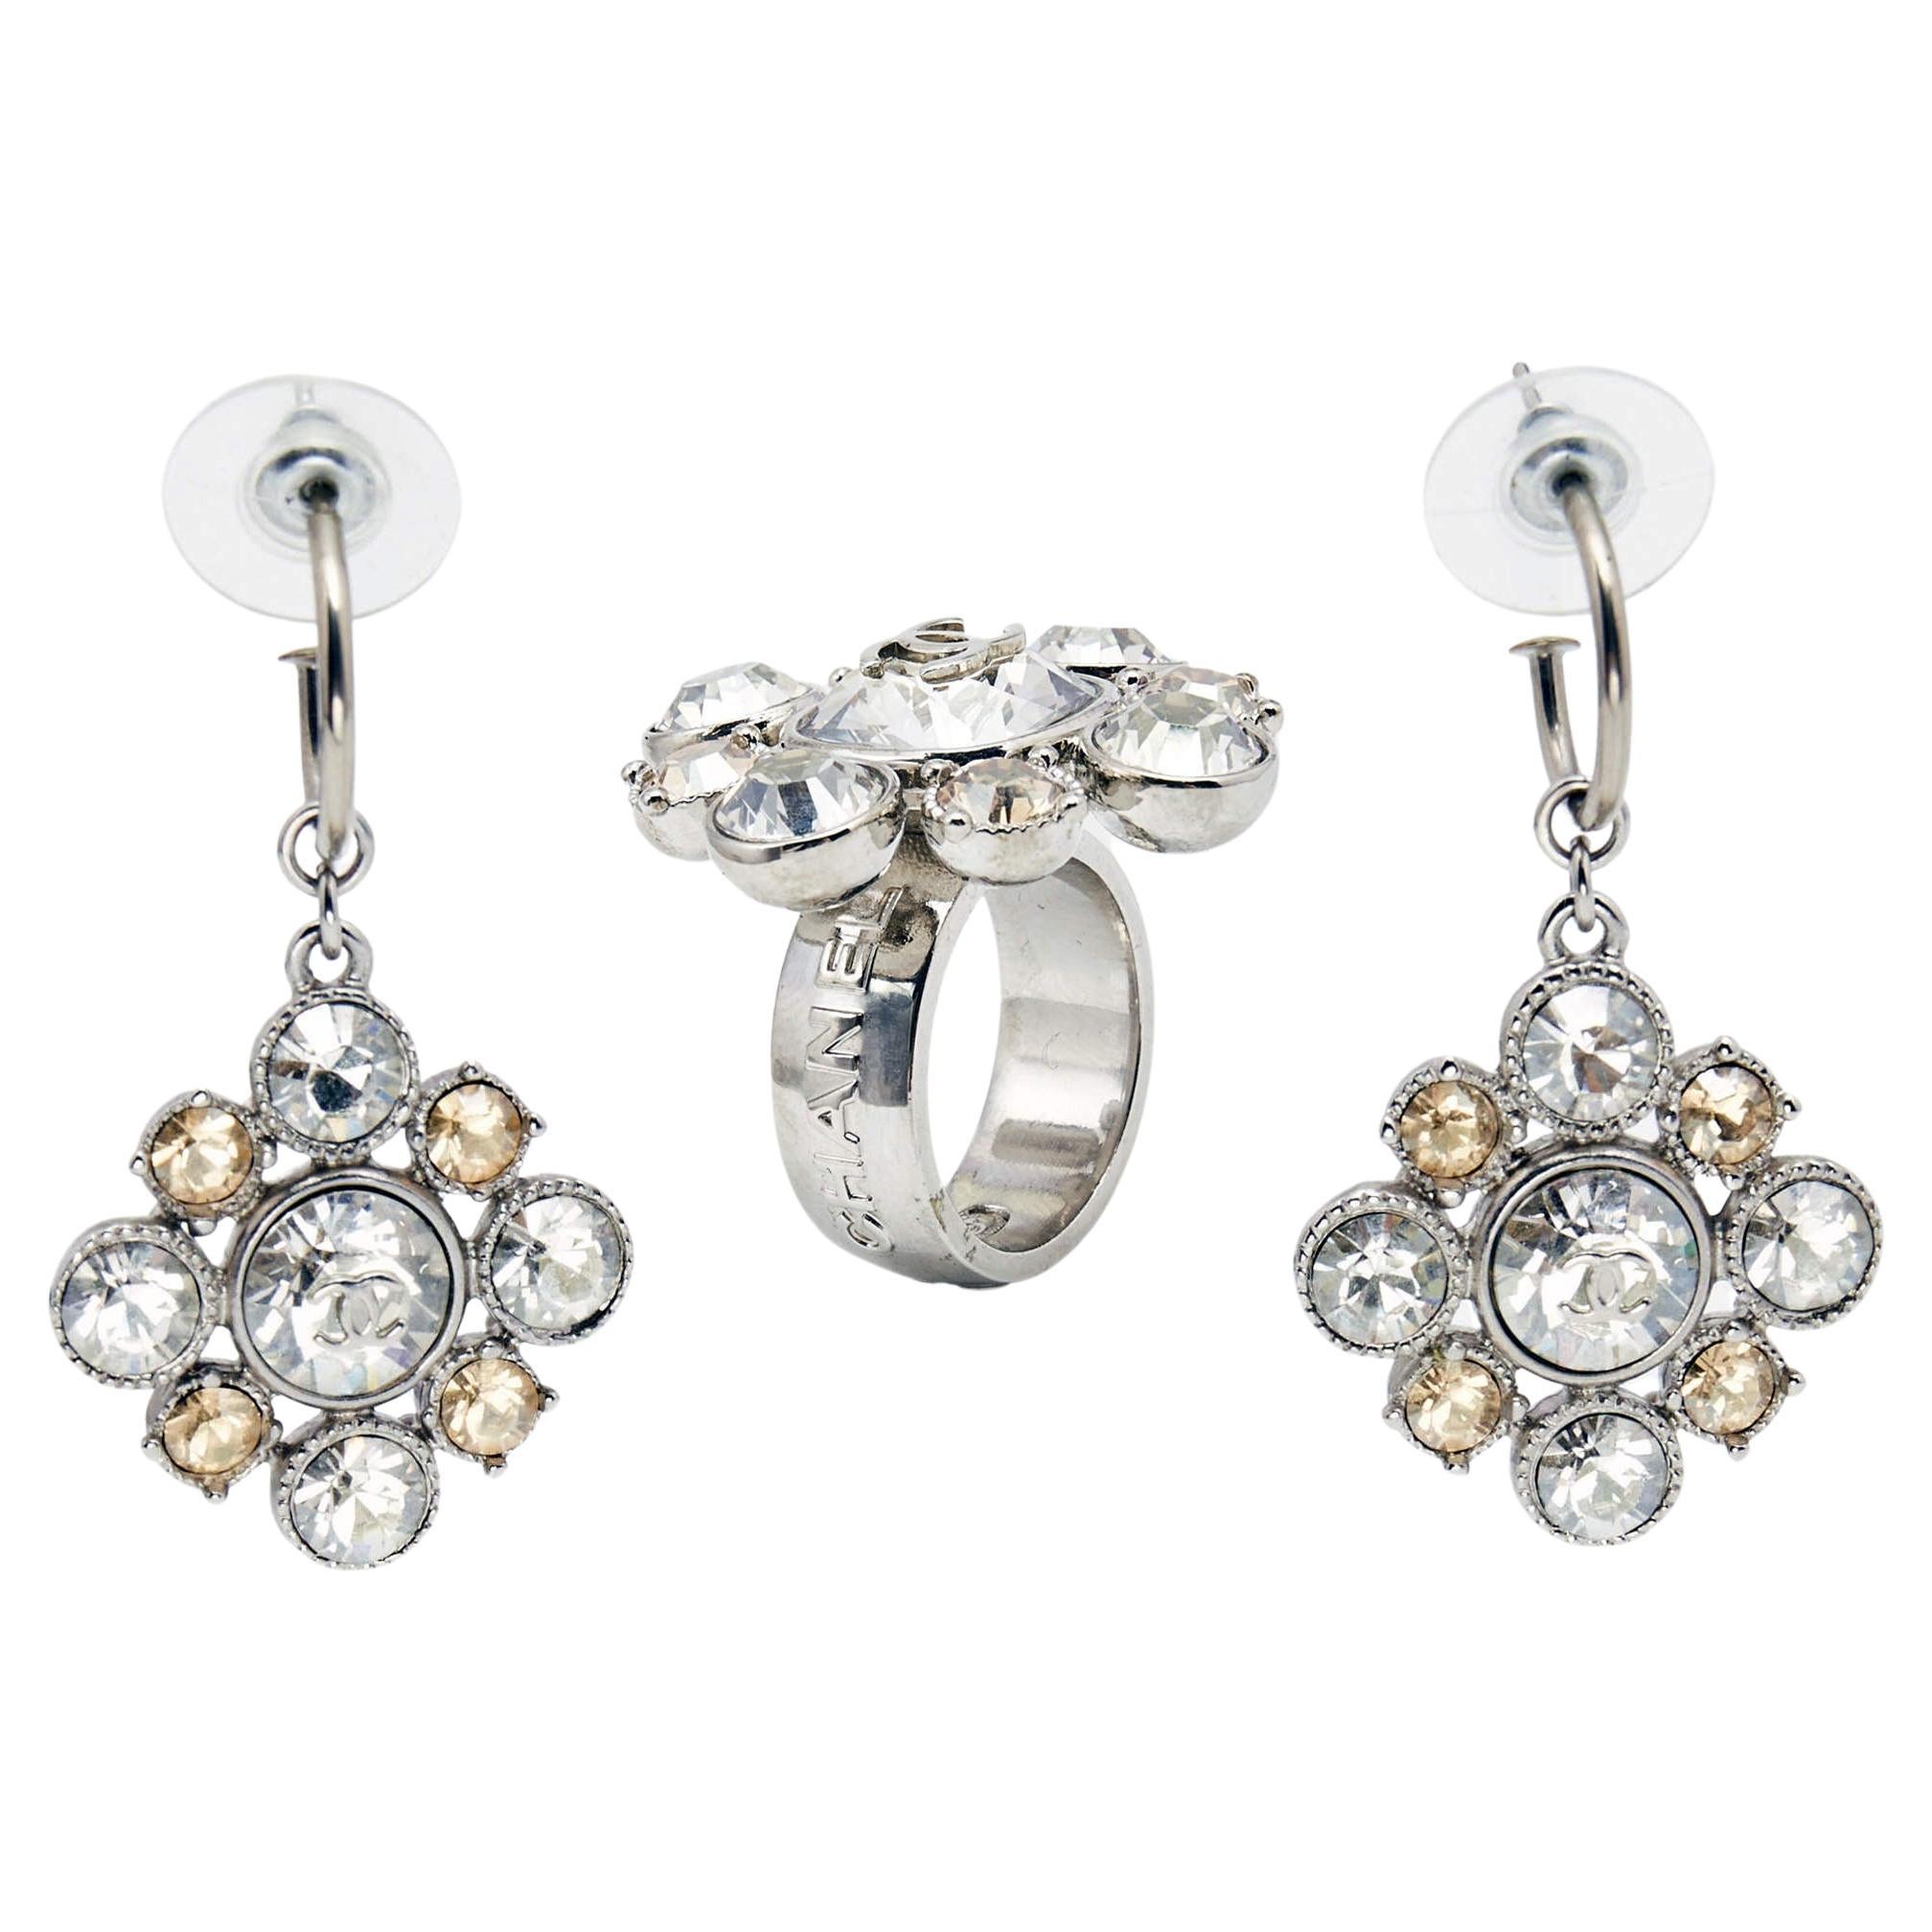 Chanel CC Floral Crystals SIlver Tone Earrings and Ring Size 54